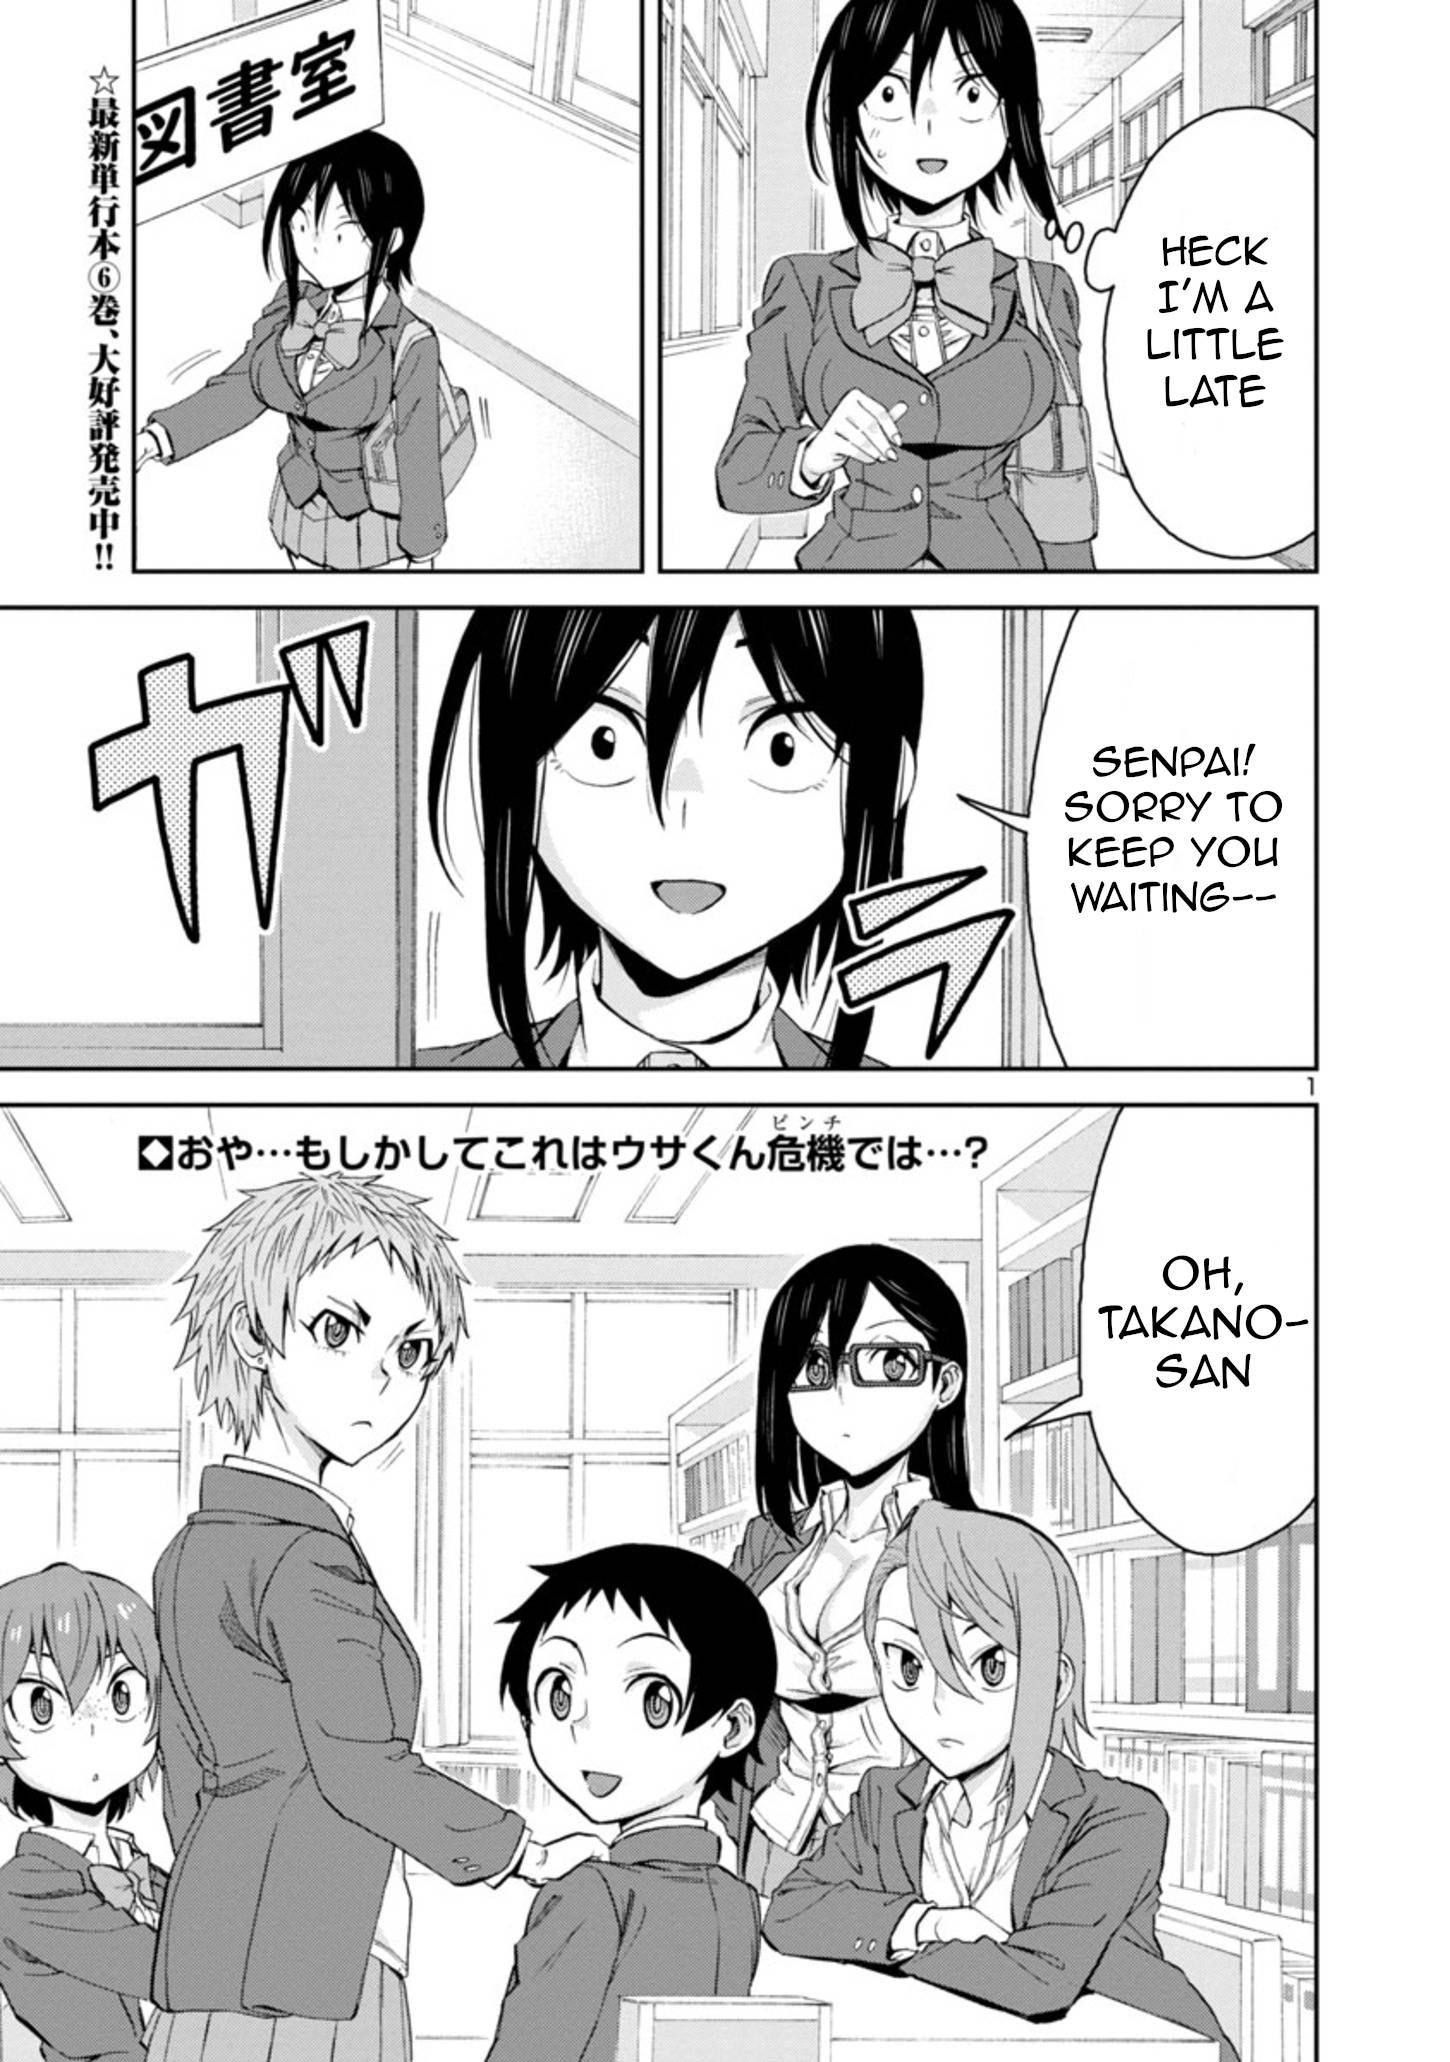 Read itomi-chan Is Shy With Strangers Manga English [New Chapters ...